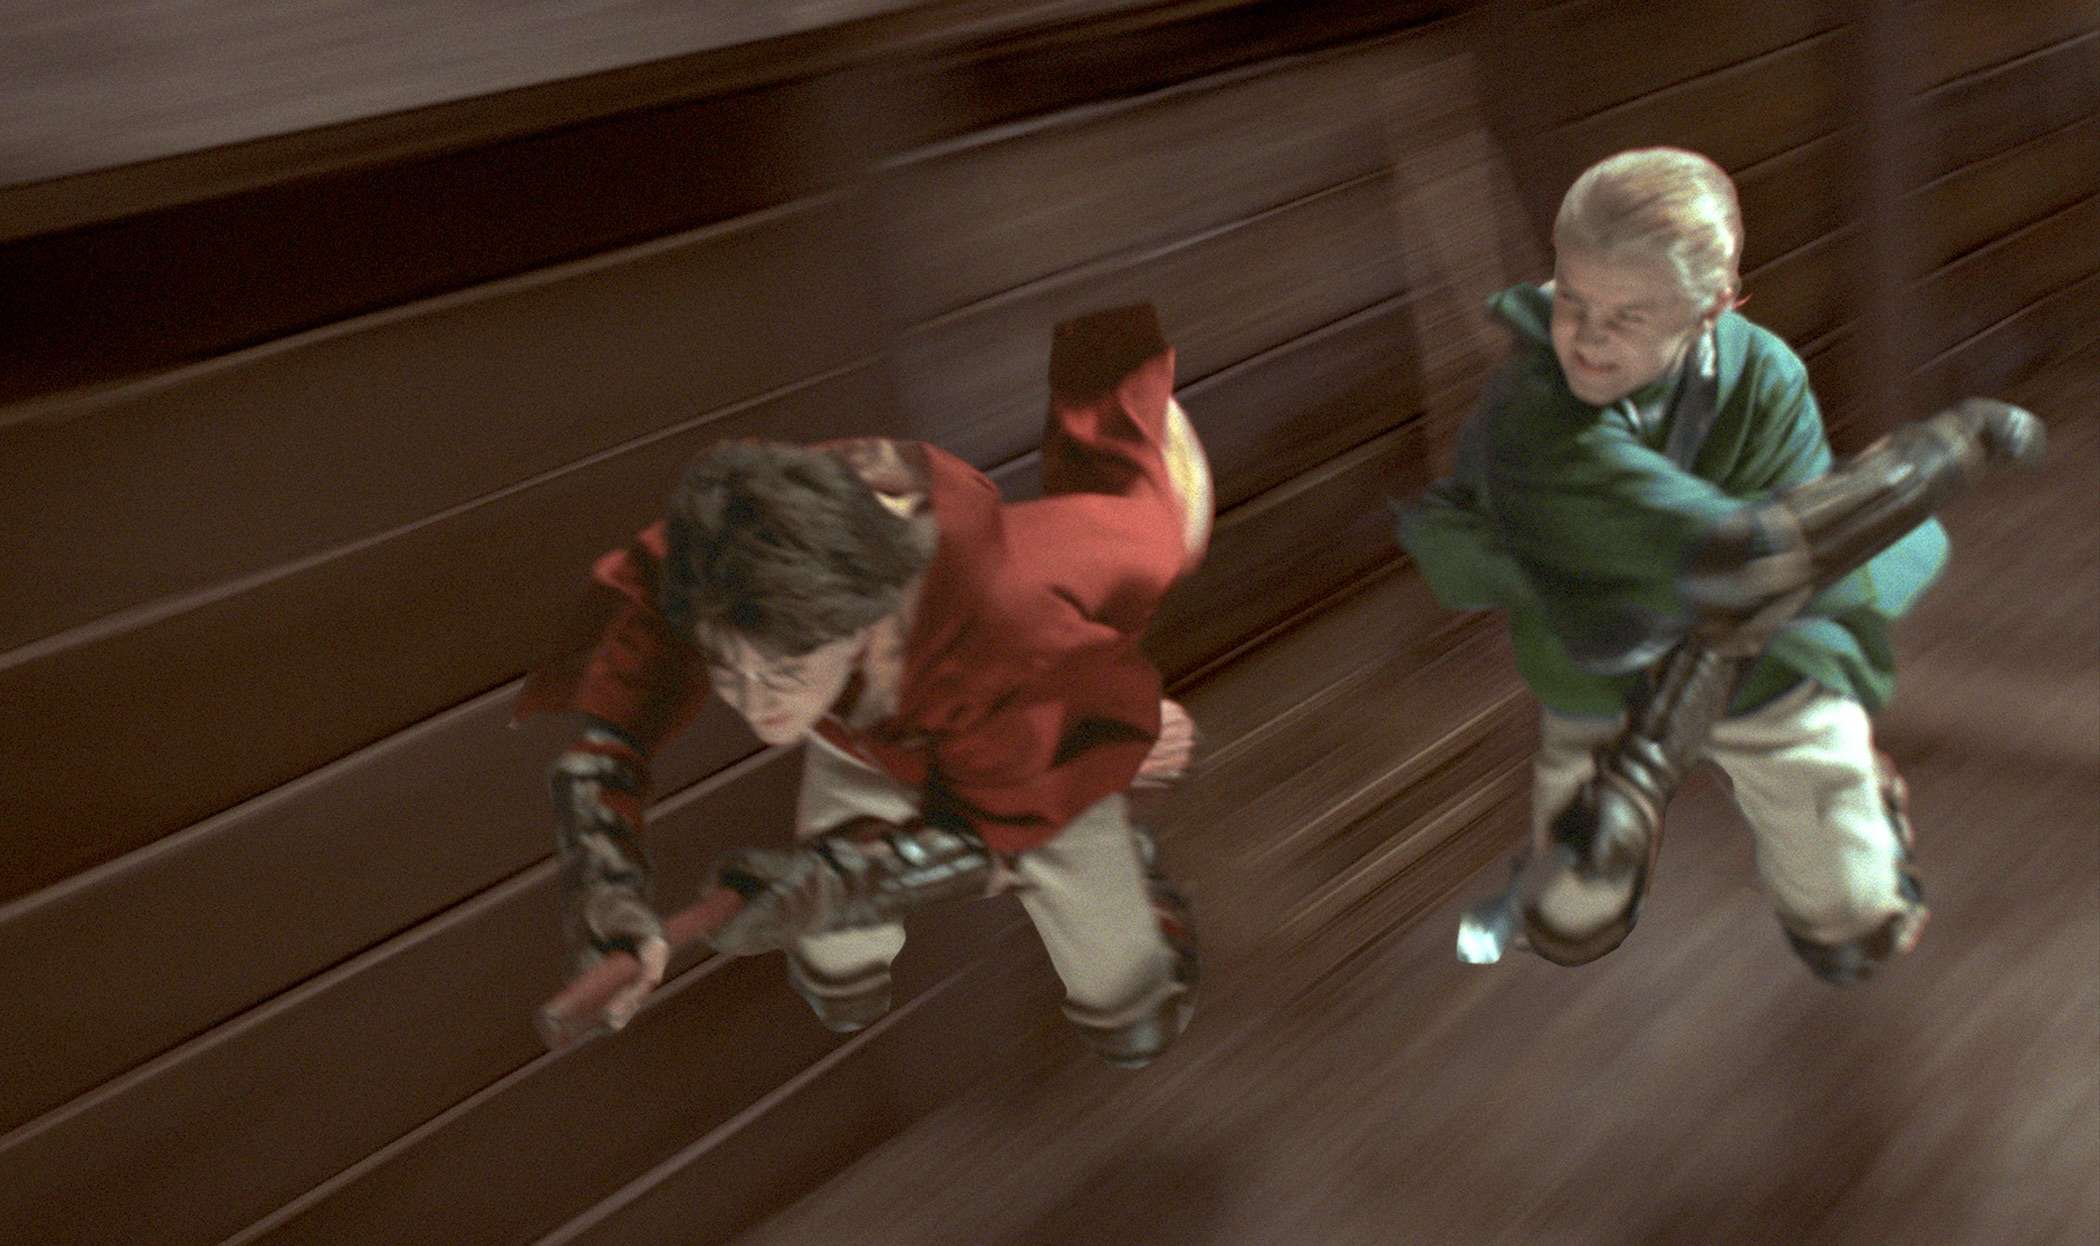 Every Harry Potter Quidditch Scene Ranked